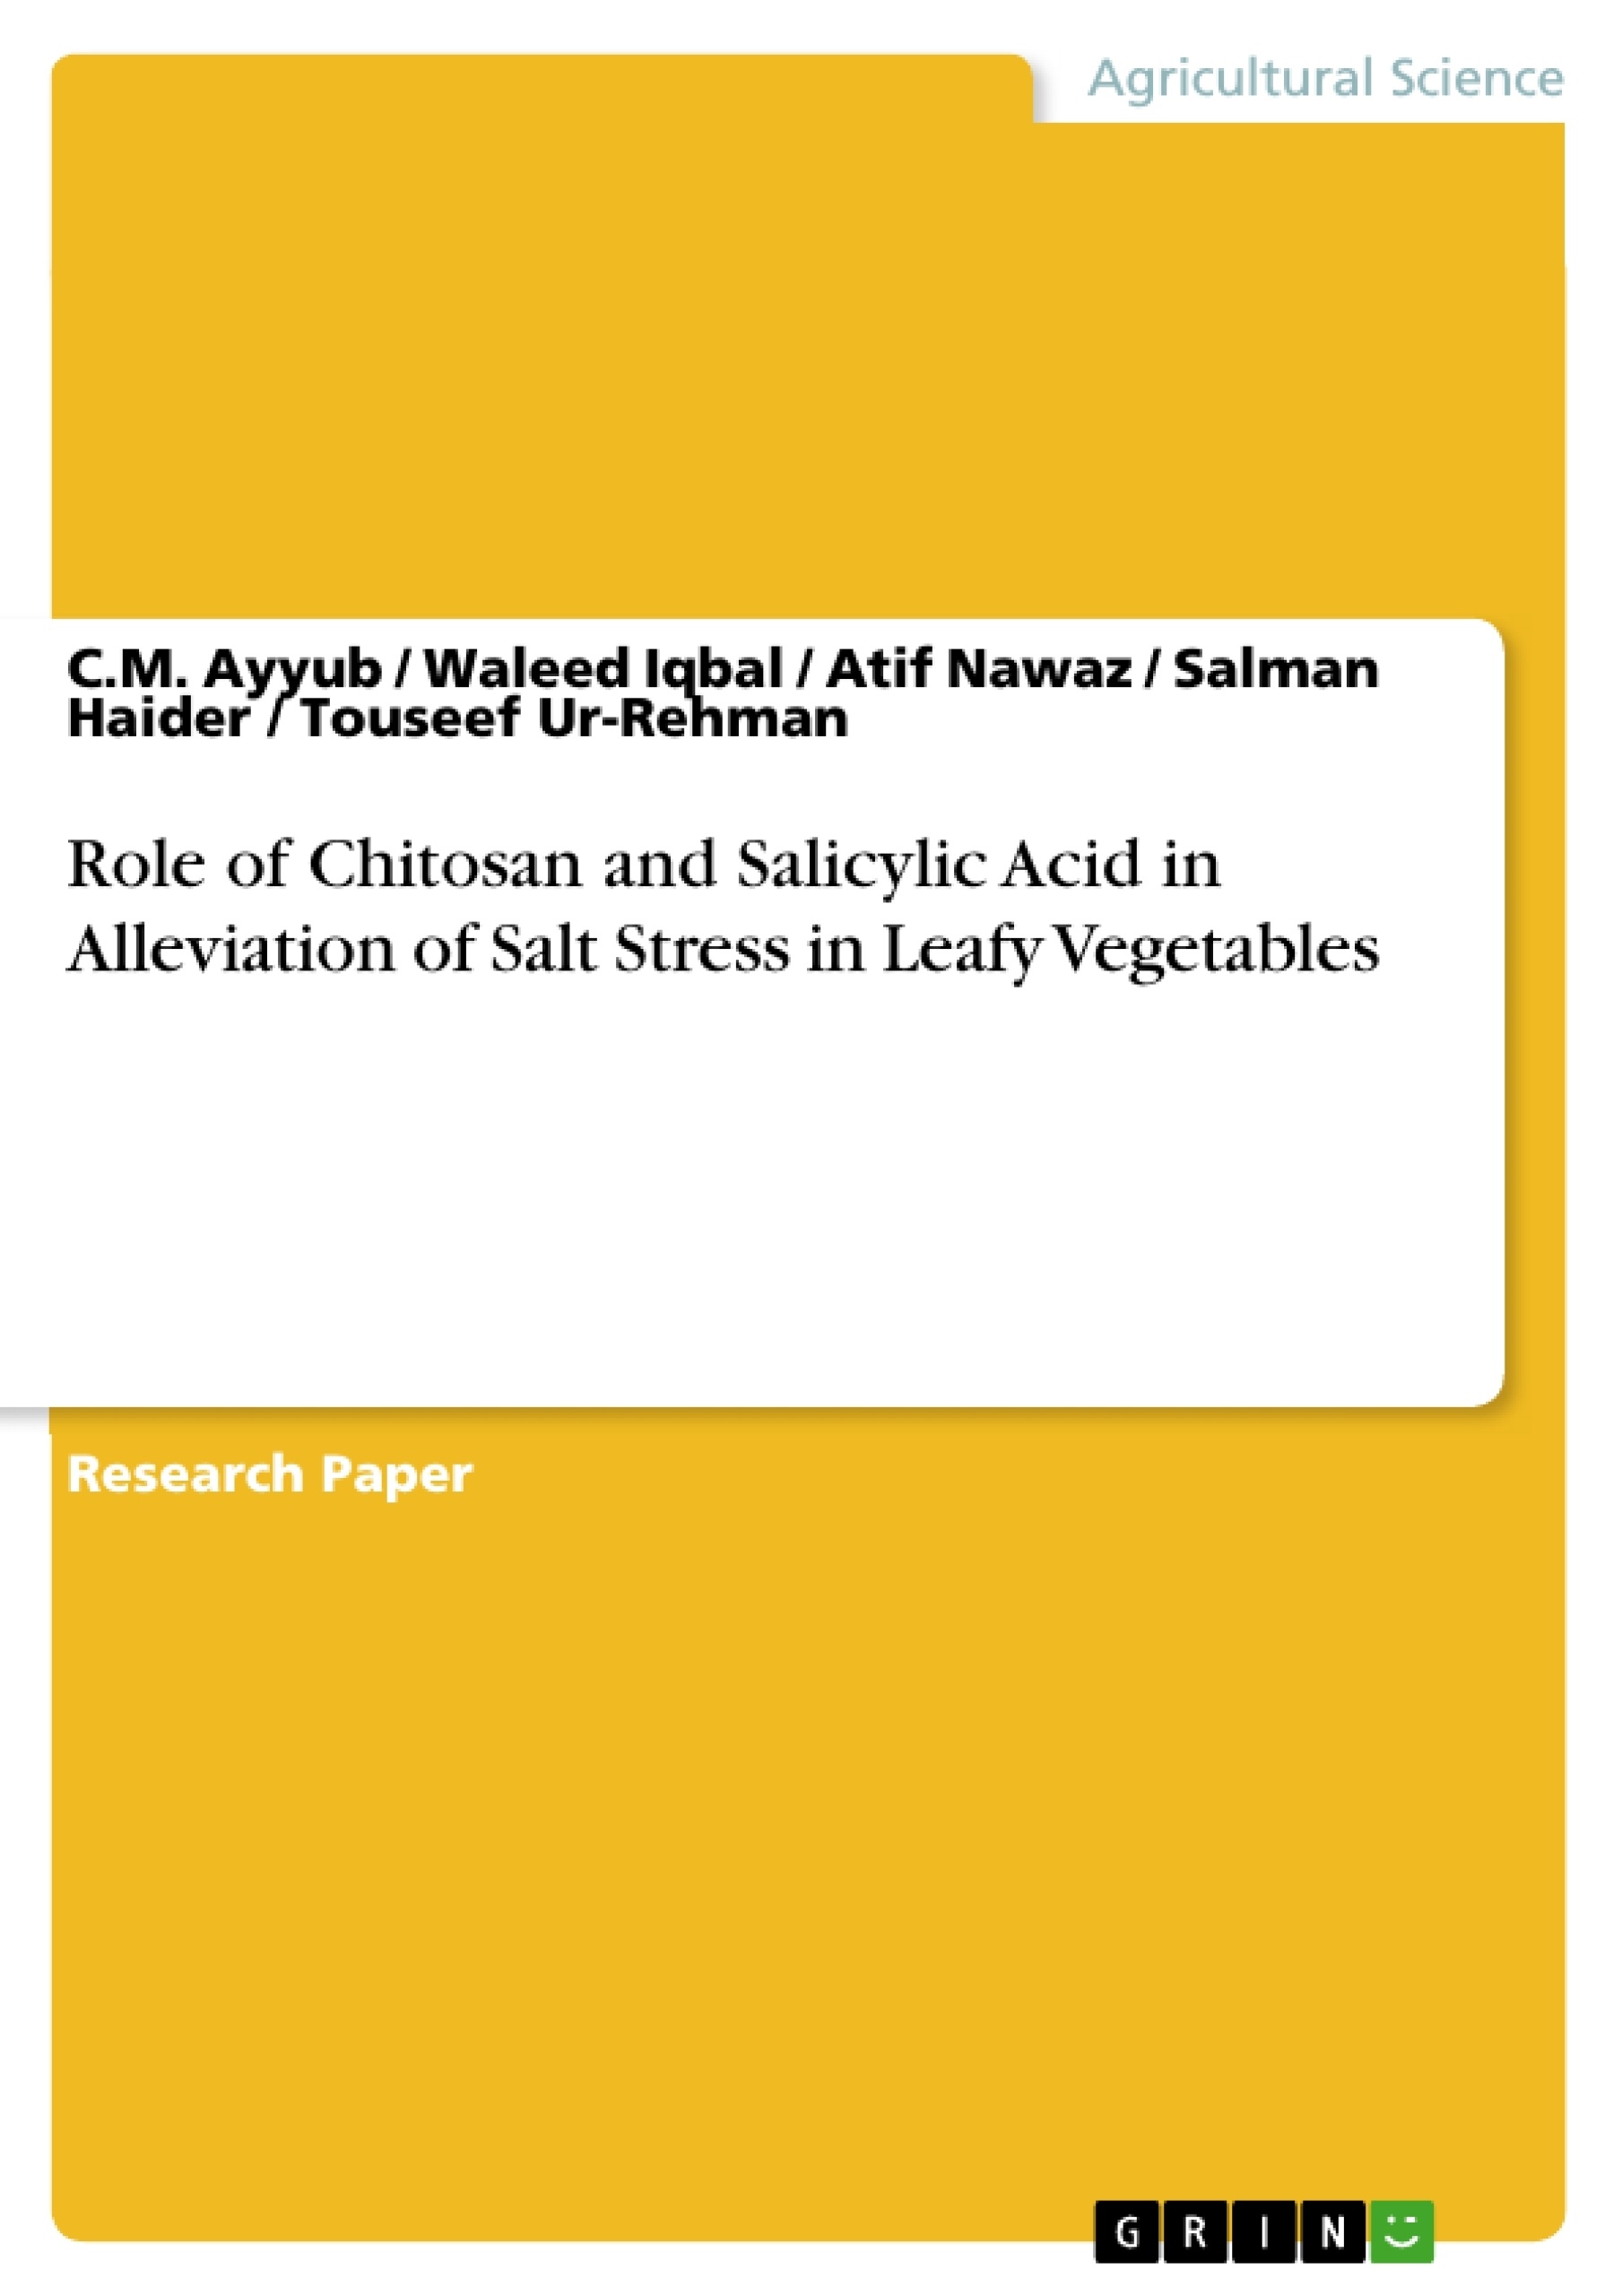 Titre: Role of Chitosan and Salicylic Acid in Alleviation of Salt Stress in Leafy Vegetables